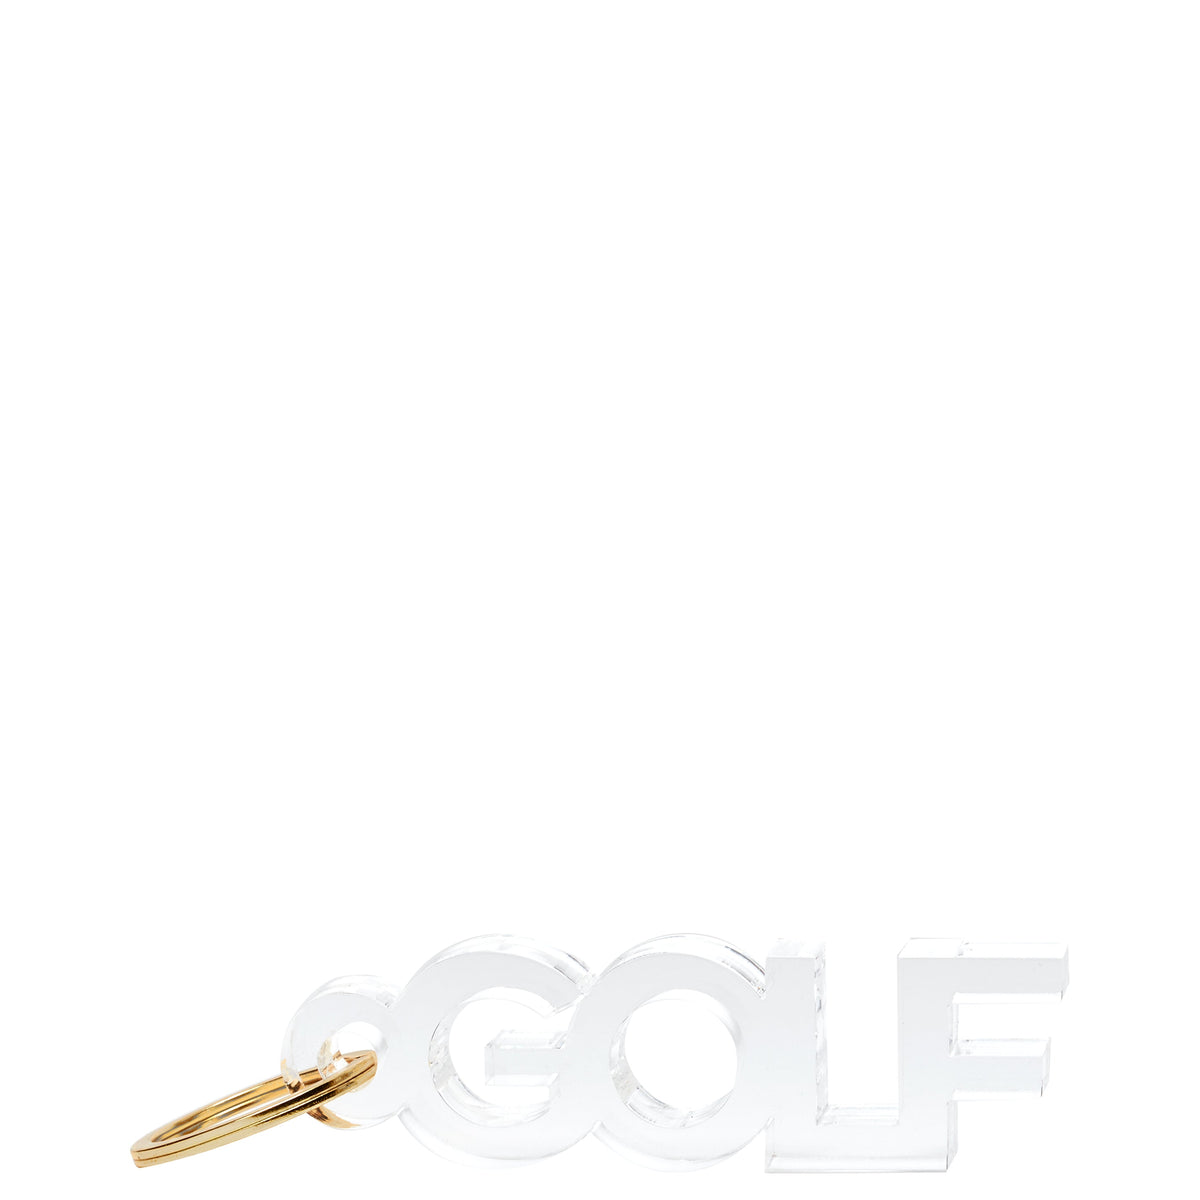 Keychain GOLF 1 inches height